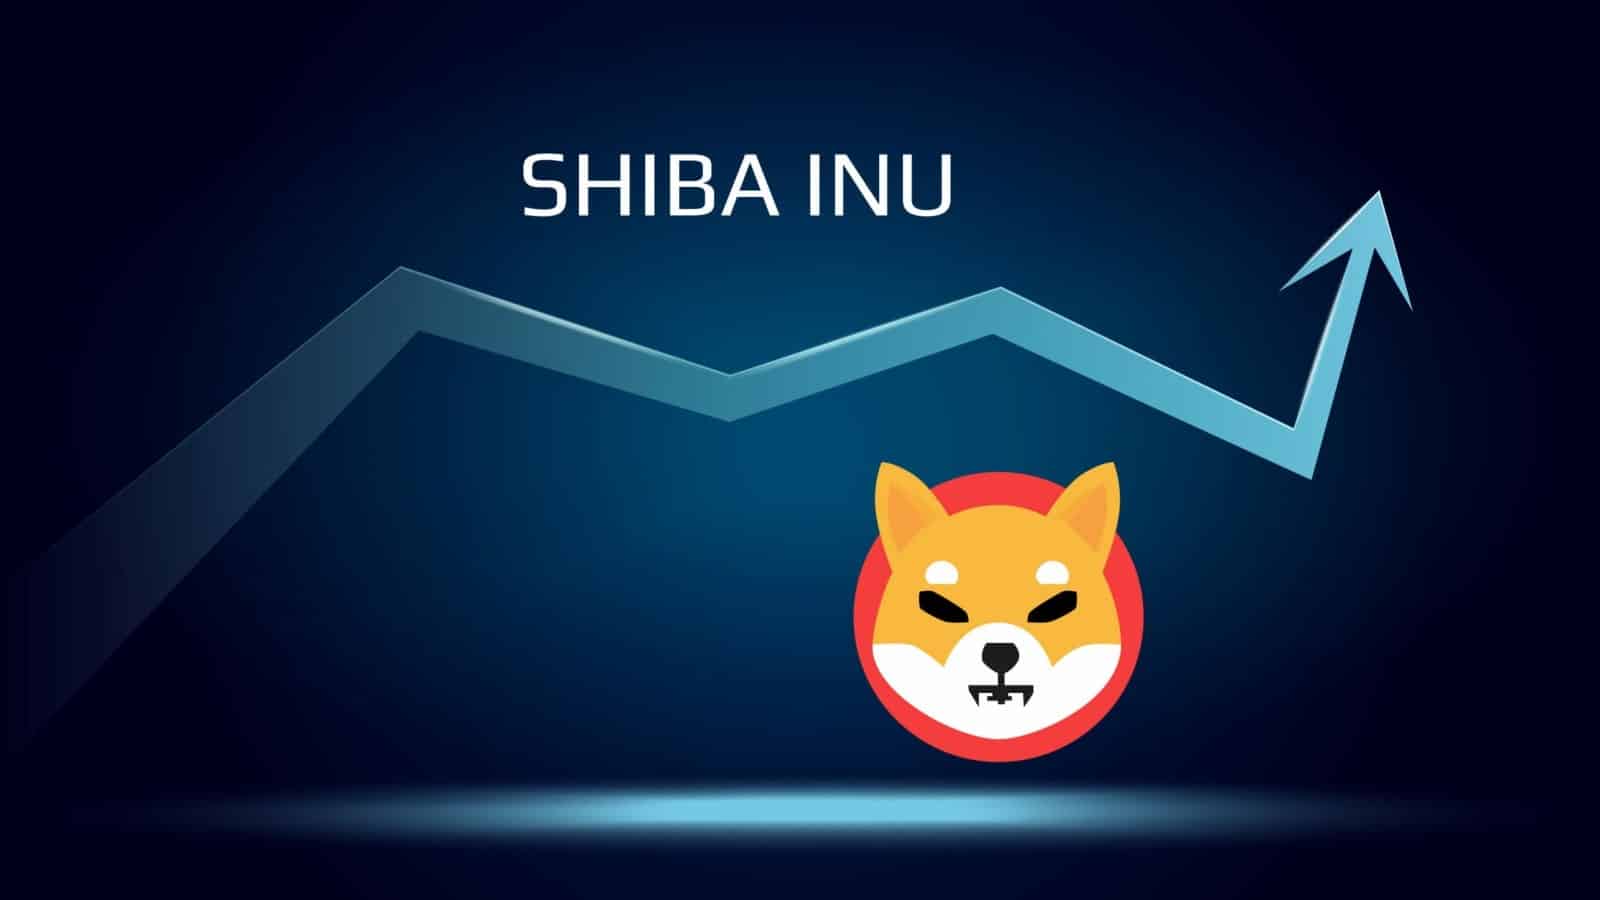 Analysts anticipate another 50% rise in Shiba Inu (SHIB)